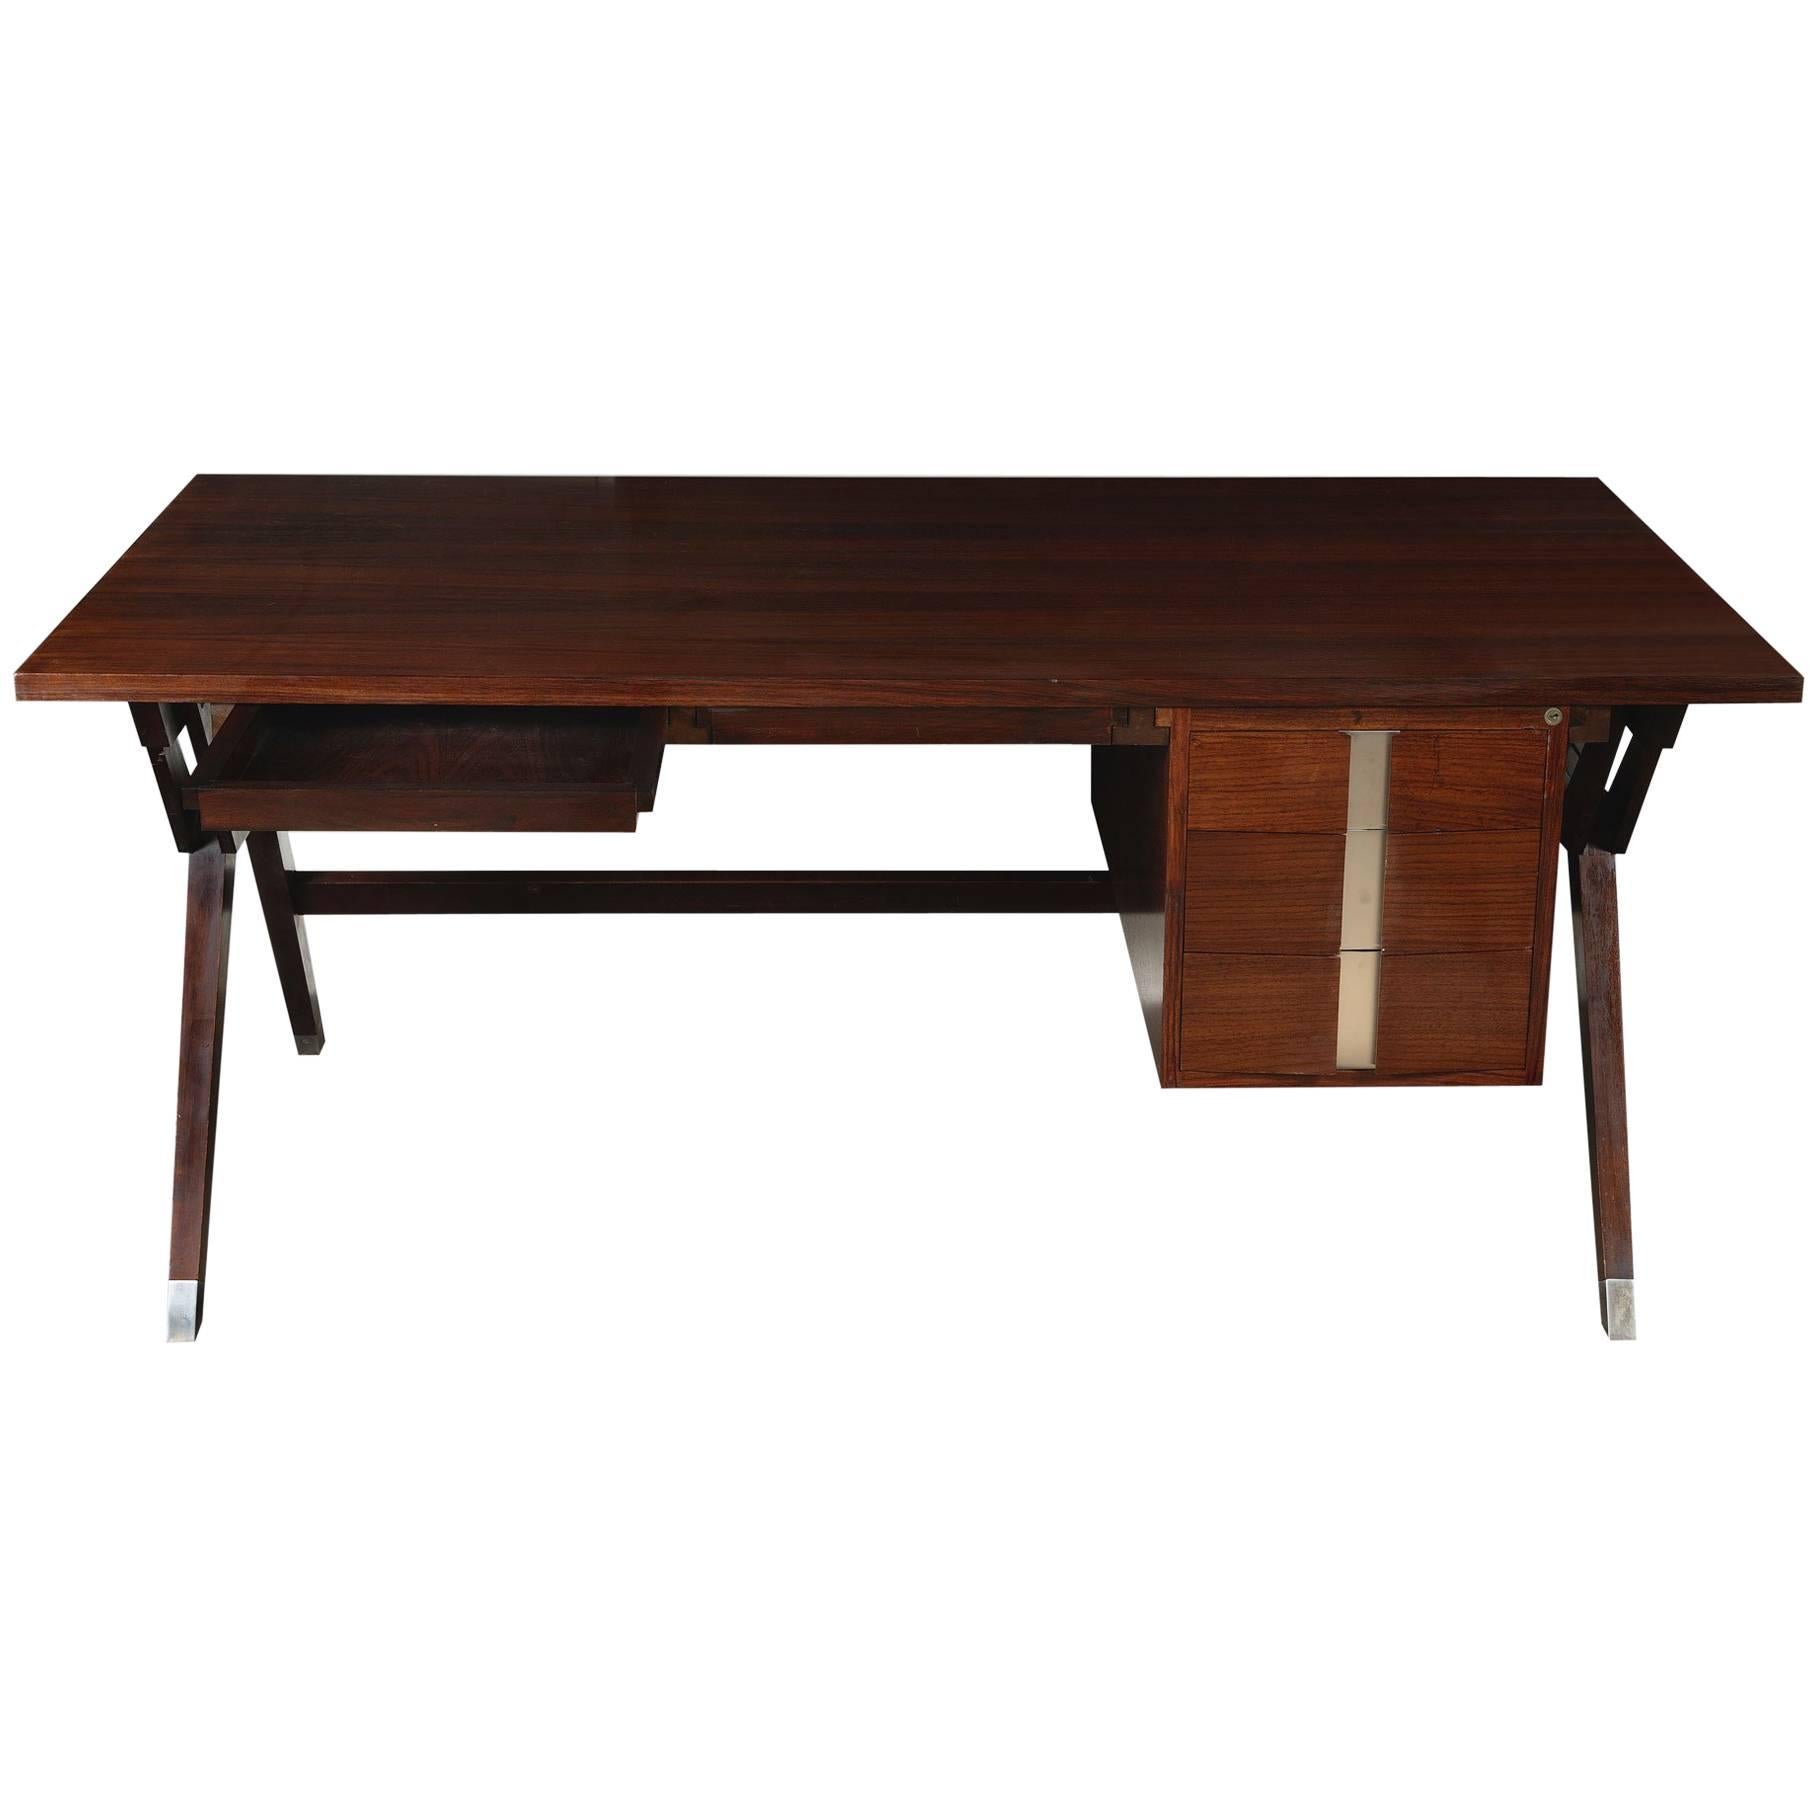 Large Flat Desk by Ico Parisi, 1958 for Mim Roma, Italy For Sale